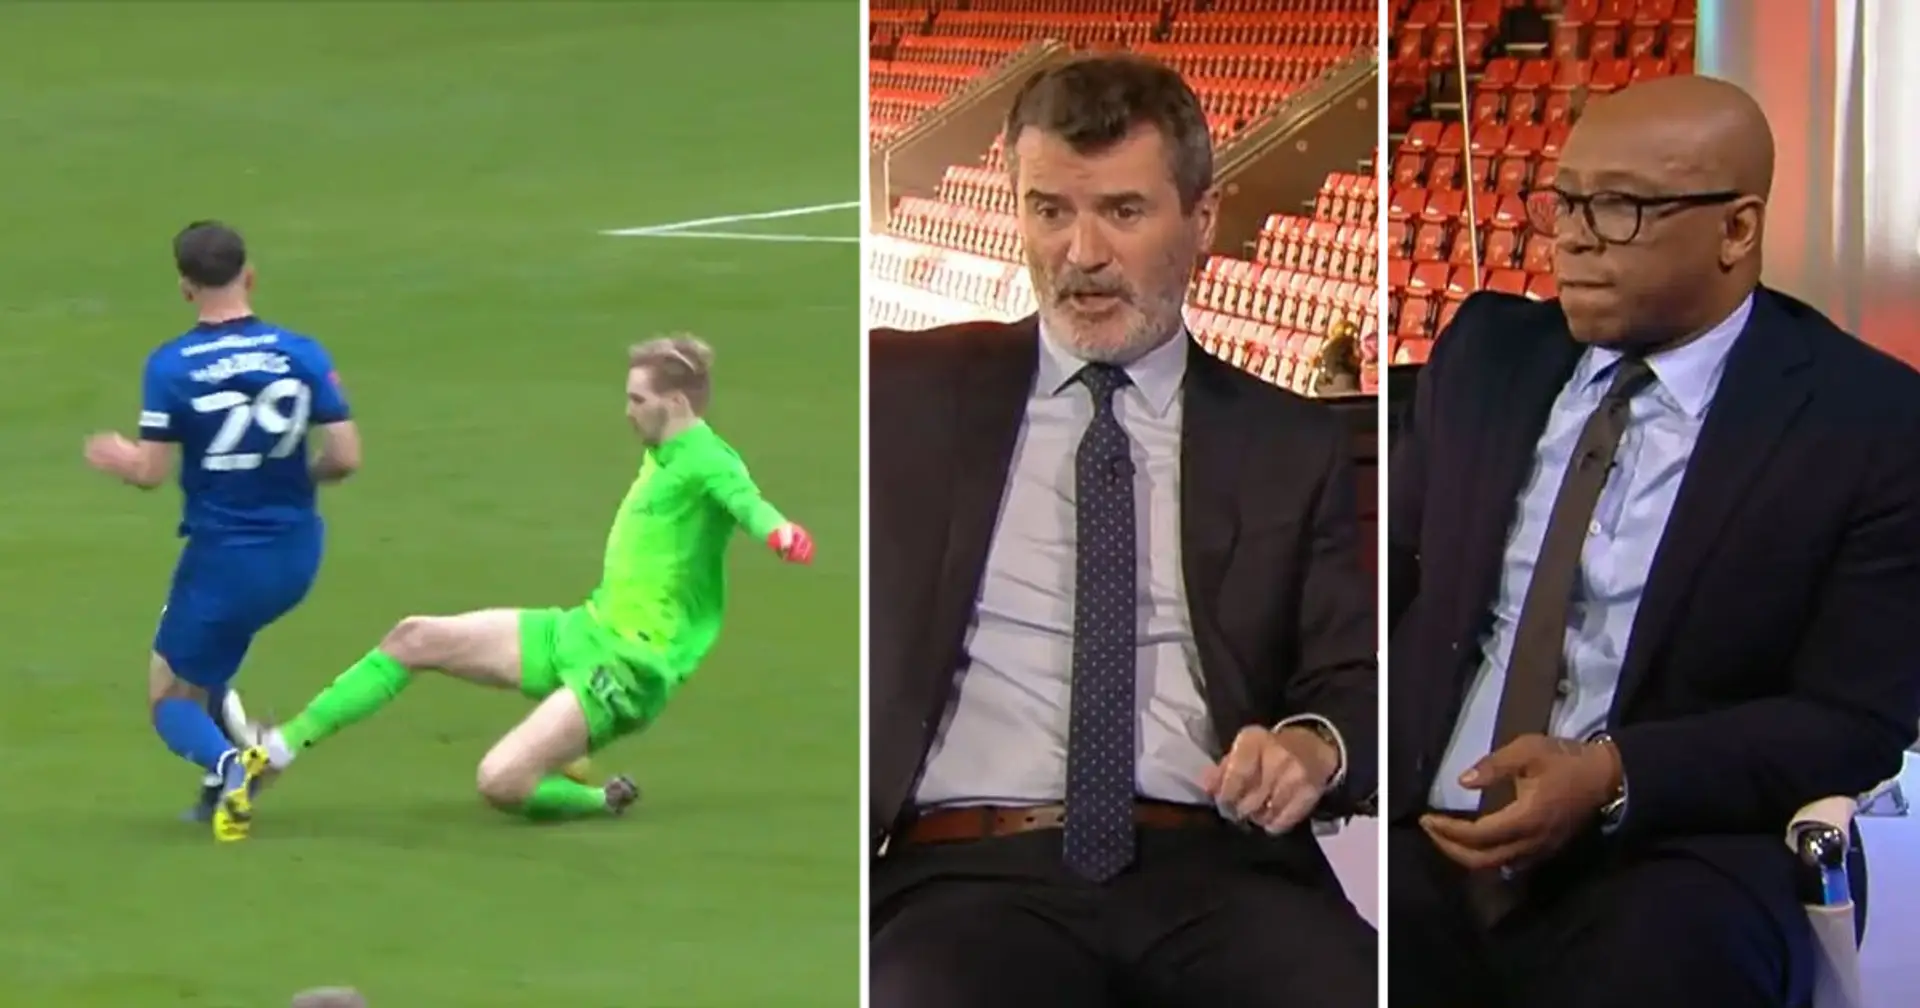 'He’s got very, very lucky': Ian Wright and Roy Keane argue Caoimhin Kelleher should've been sent off vs Cardiff City